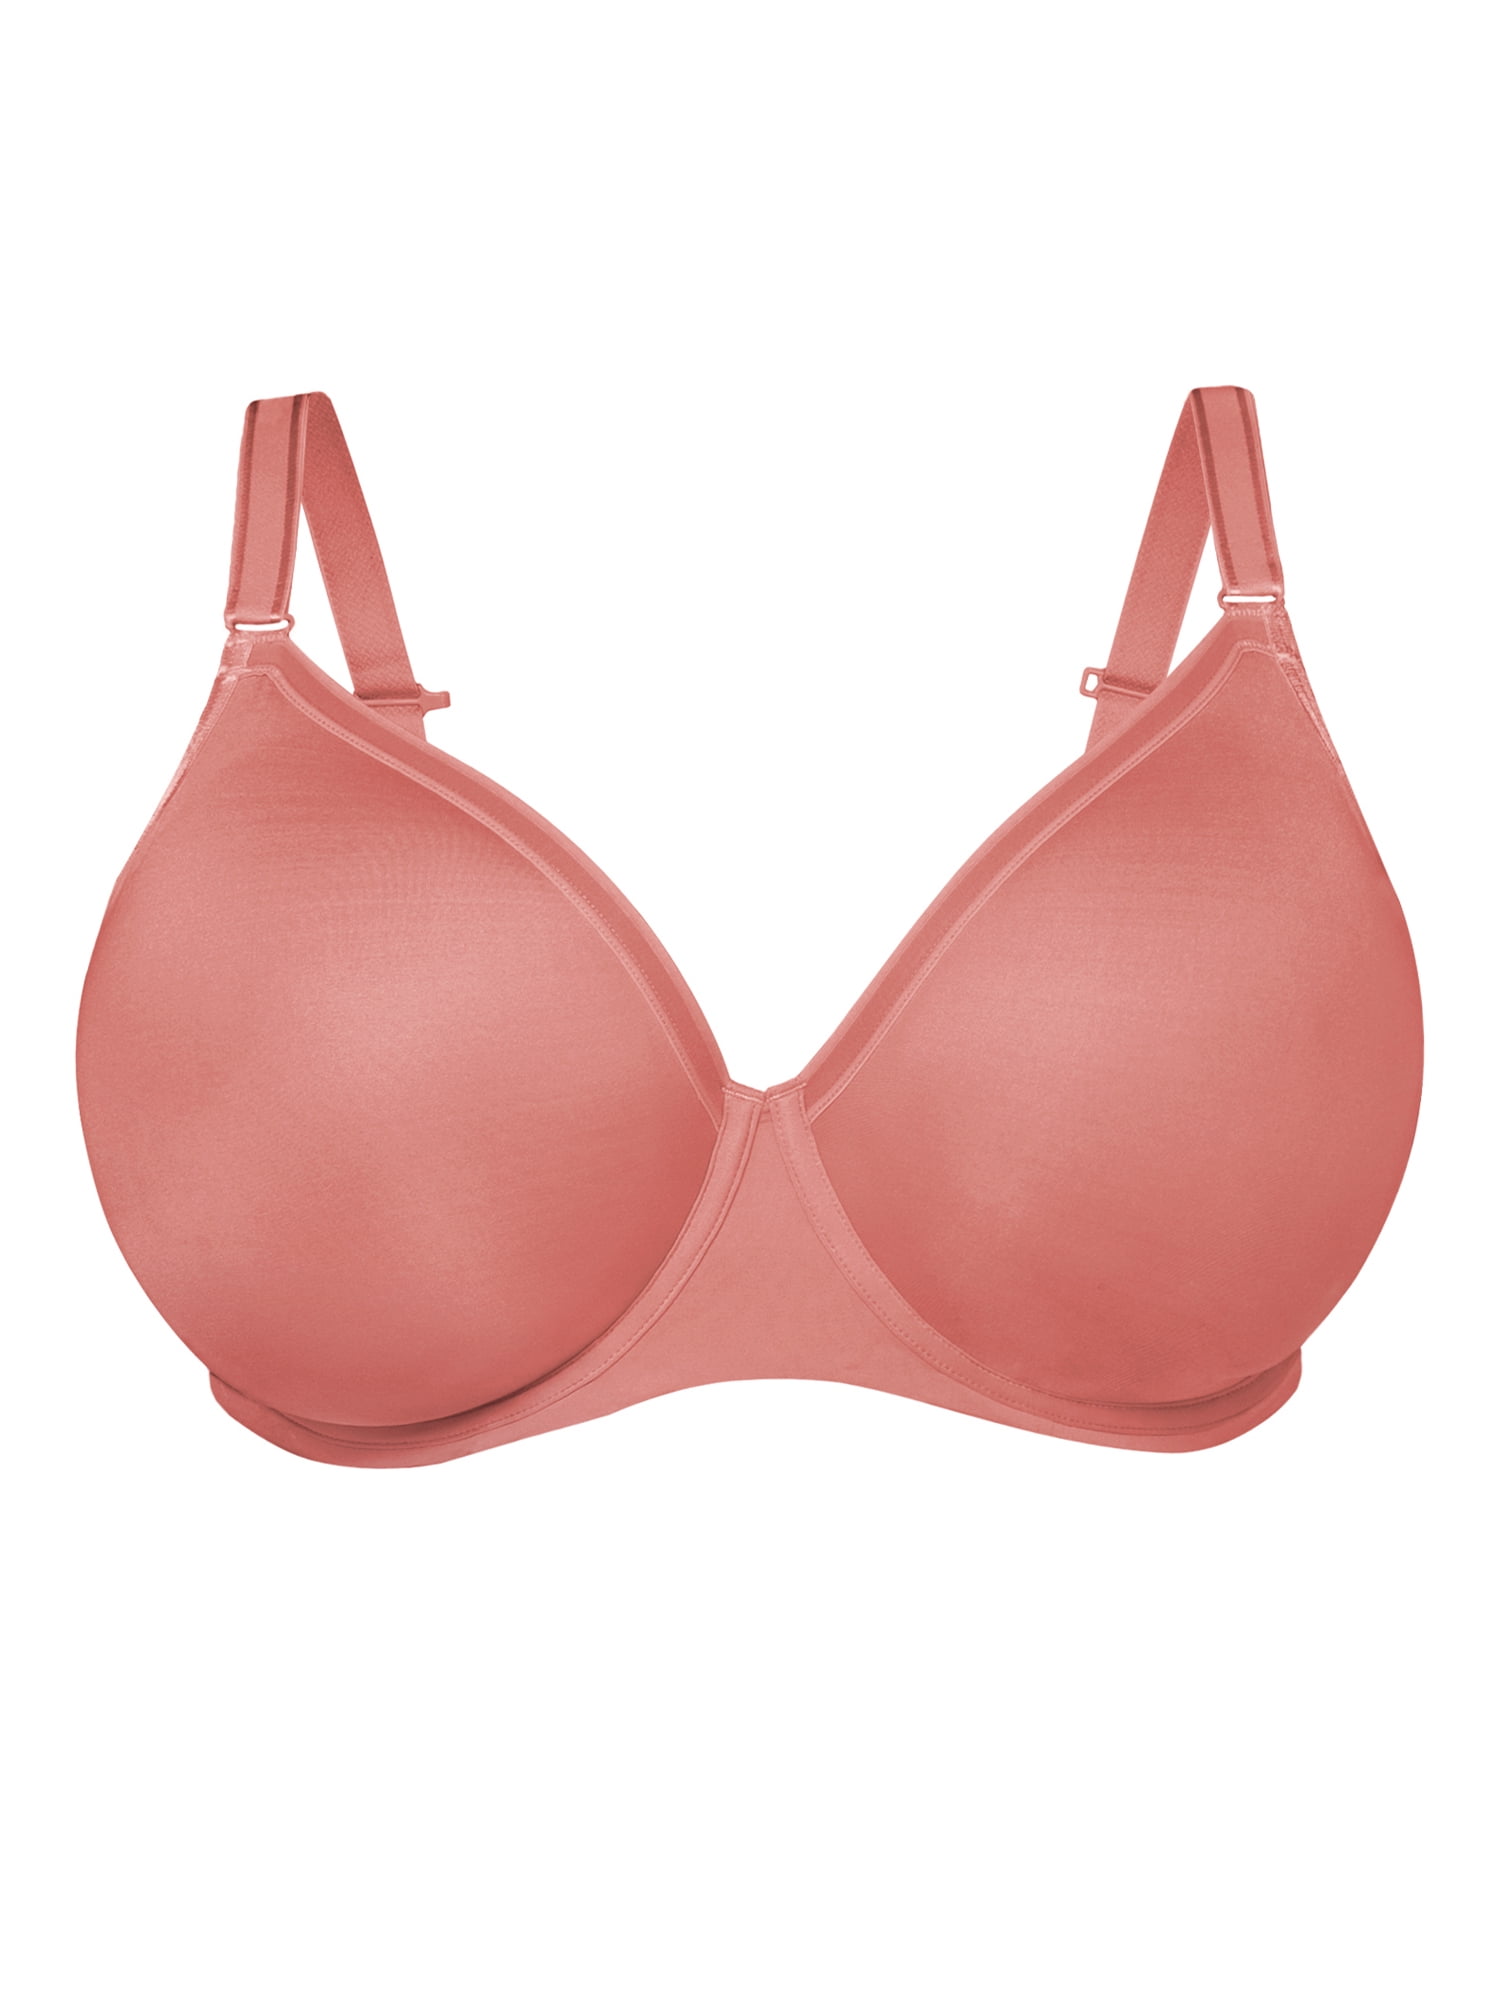 Fit for Me by Fruit of the Loom Women's Unlined Underwire Bra, Style FT967,  Sizes 38D to 42H 